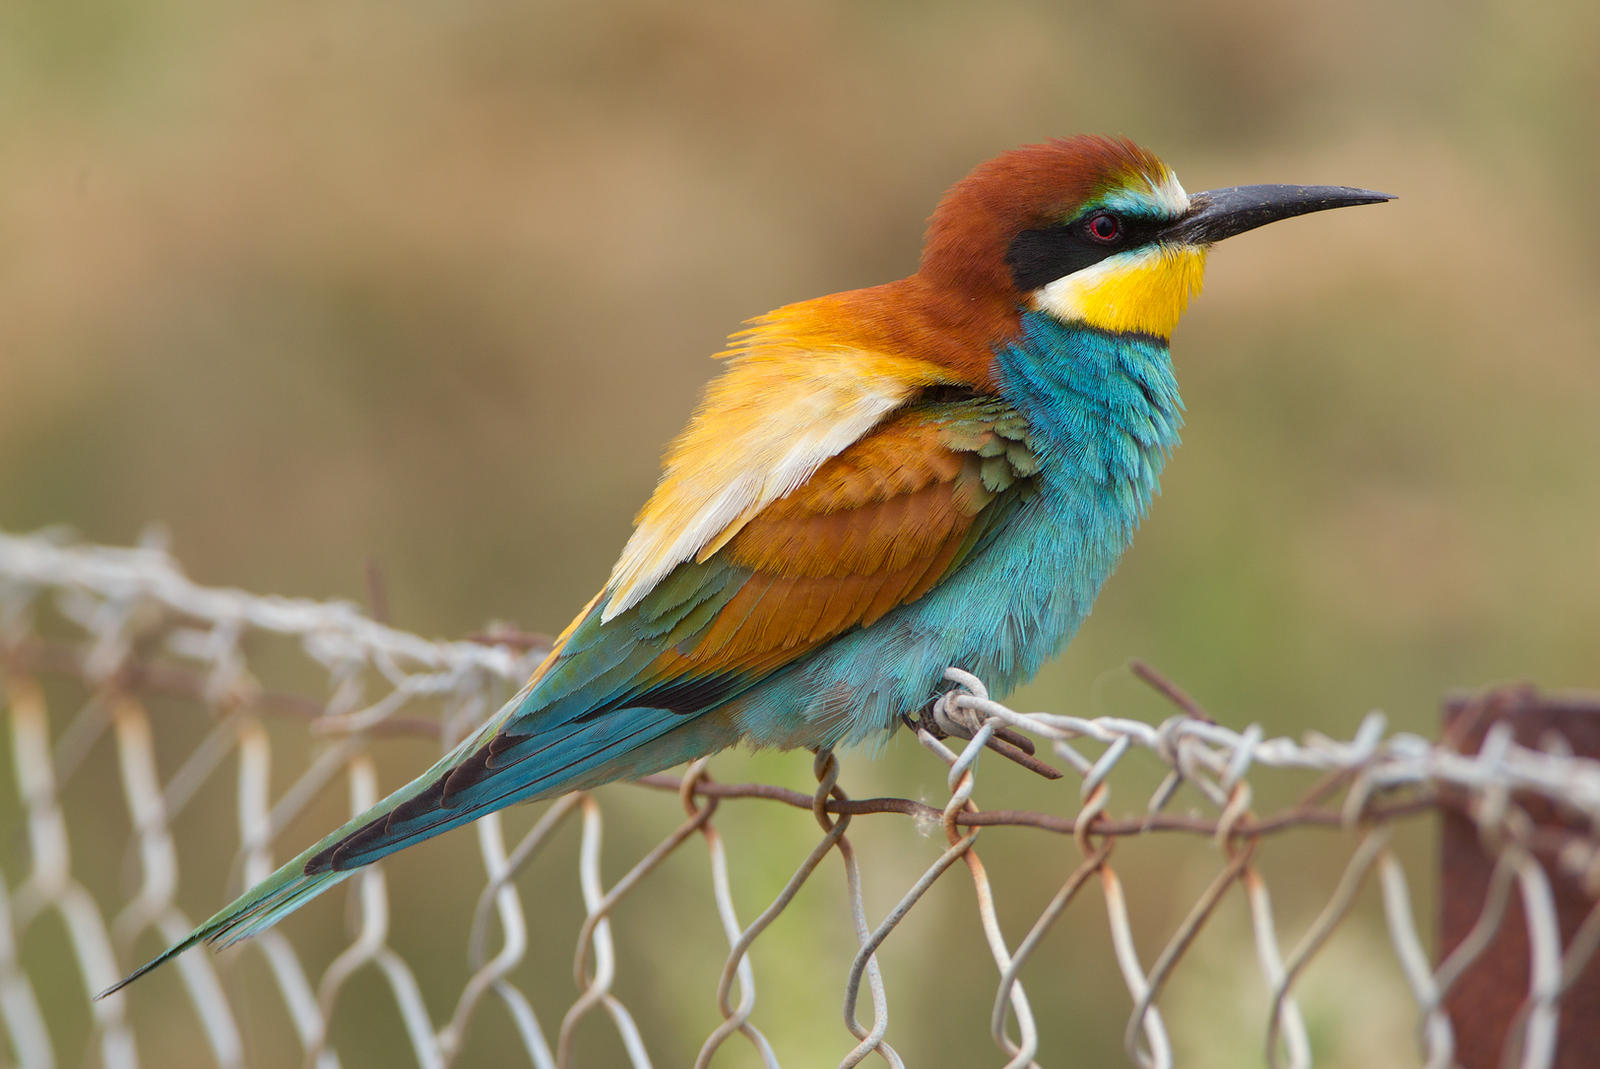 Electric Fence -European Bee-eater